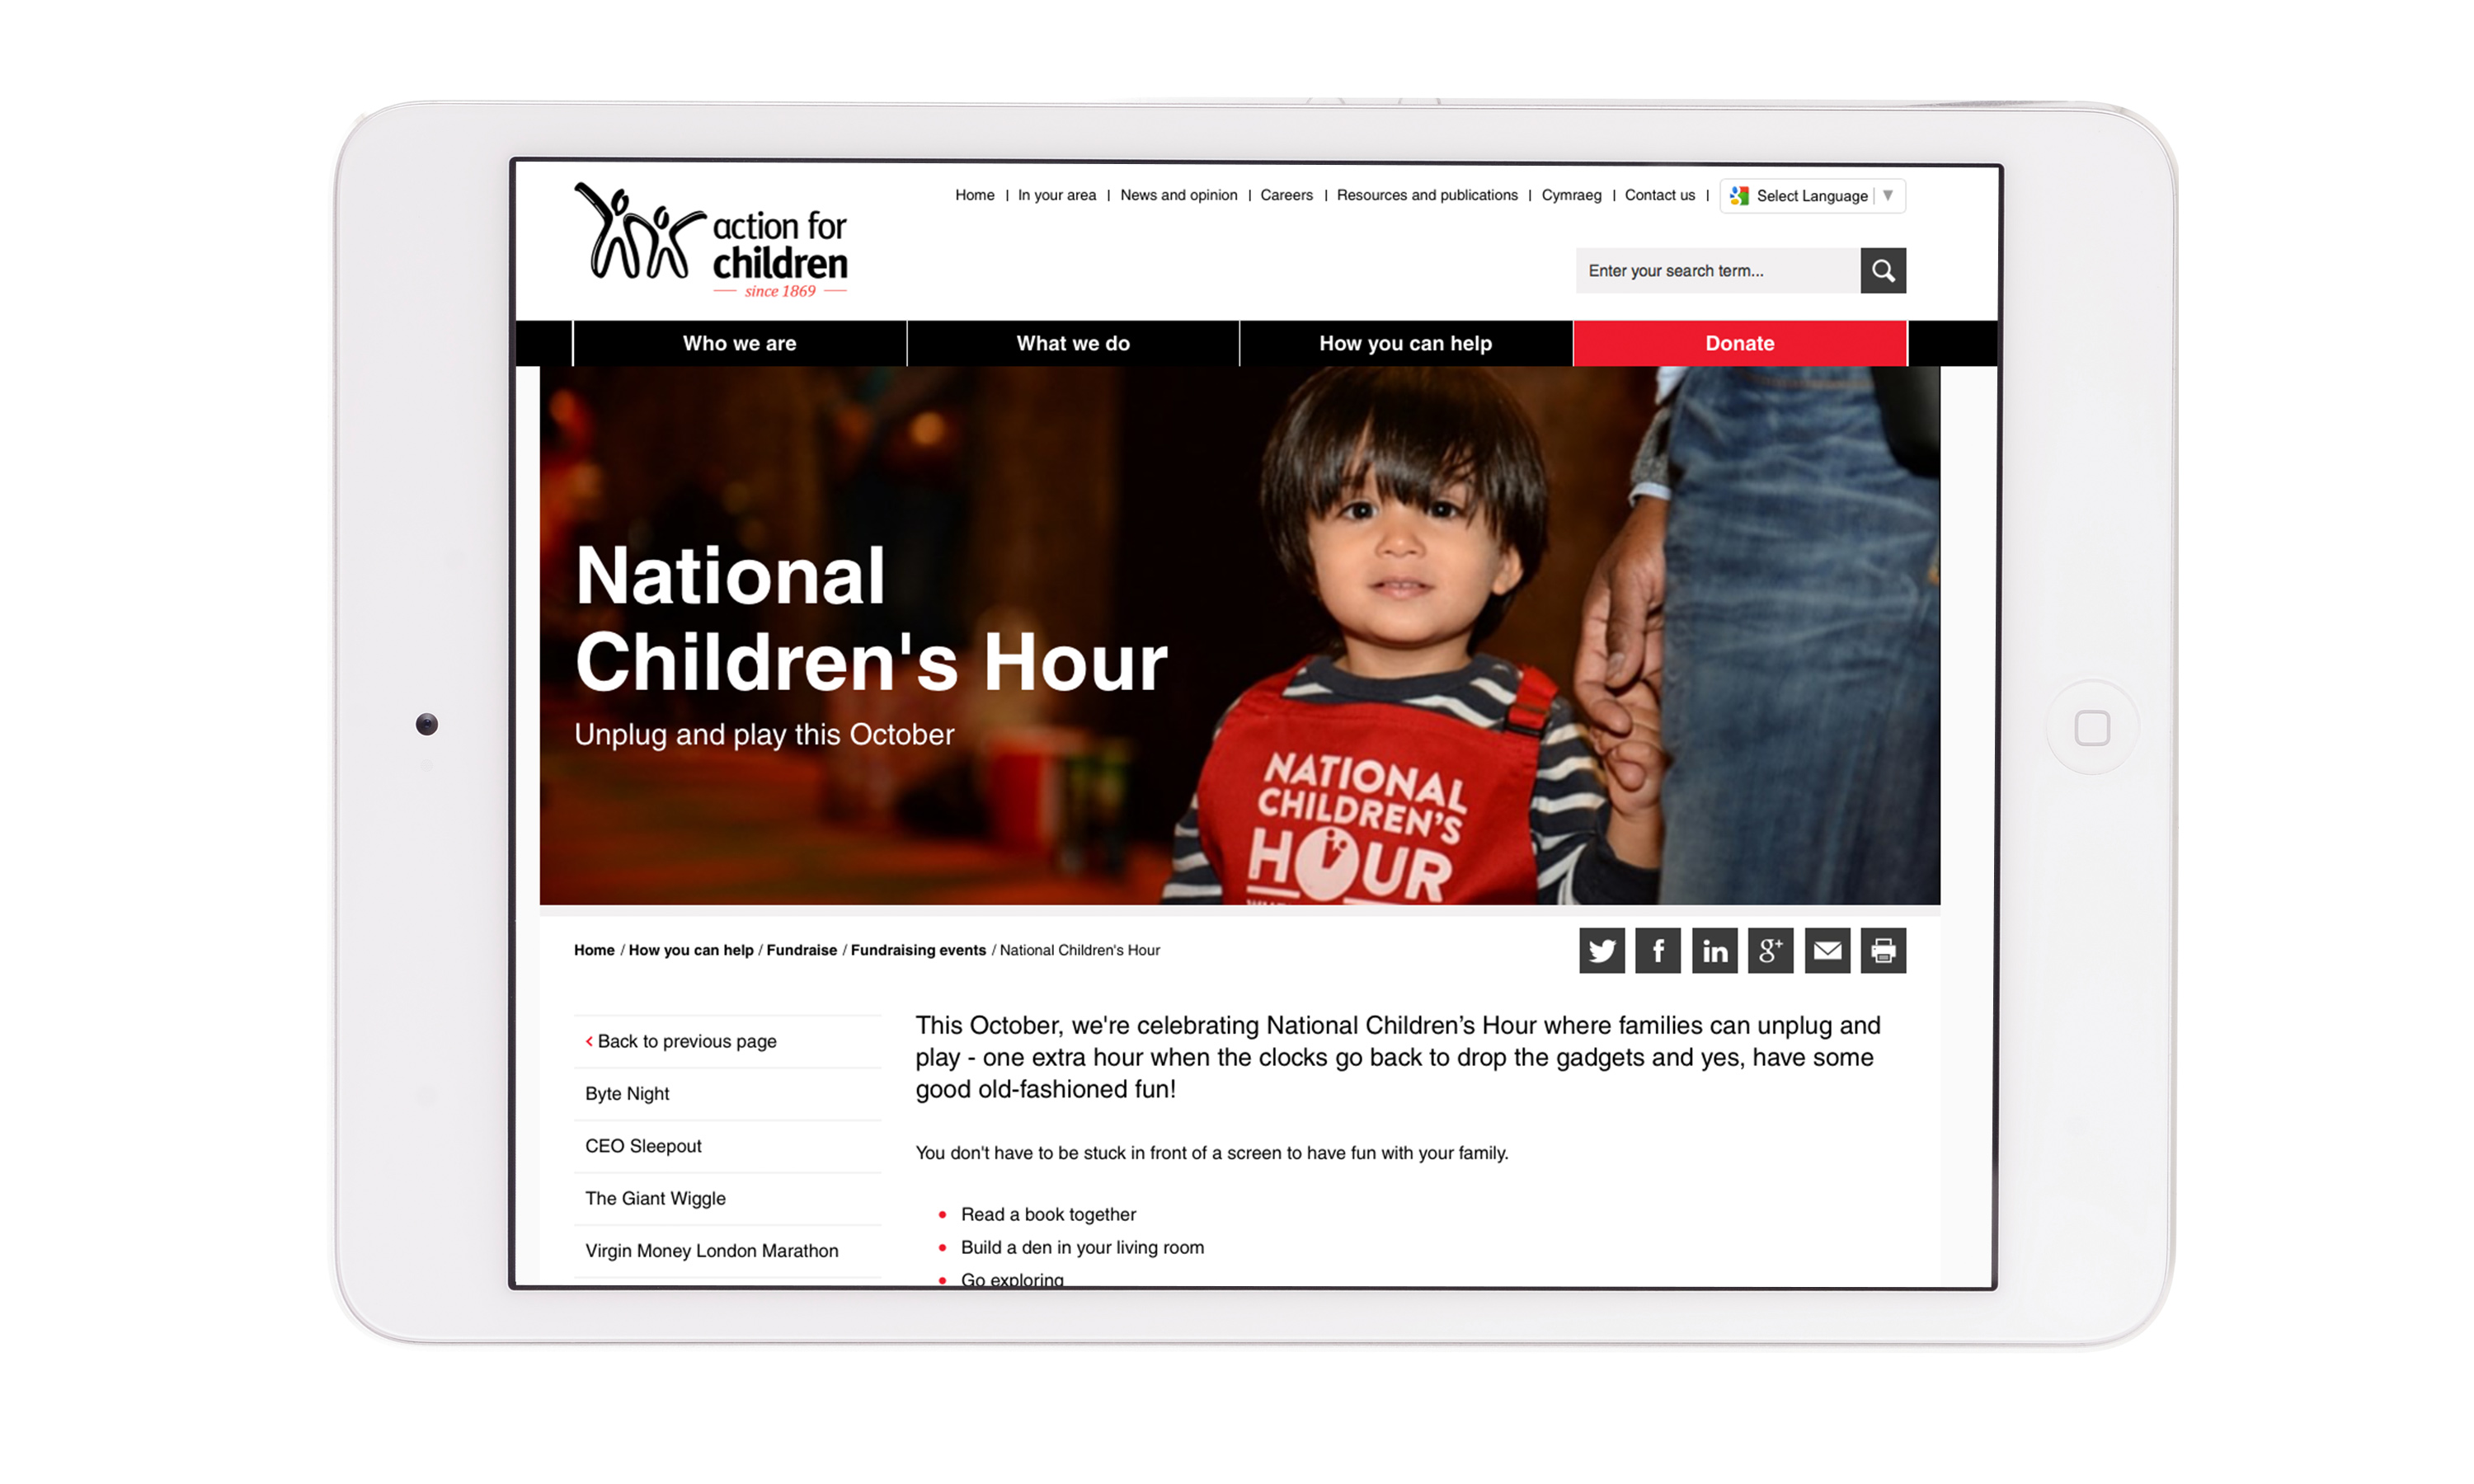 Brand campaign by Neon - designed by Dana Robertson - Charity sector branding - Action for children - National Children’s Hour campaign - website detail featuring child with an apron with National Children’s Hour logo on it